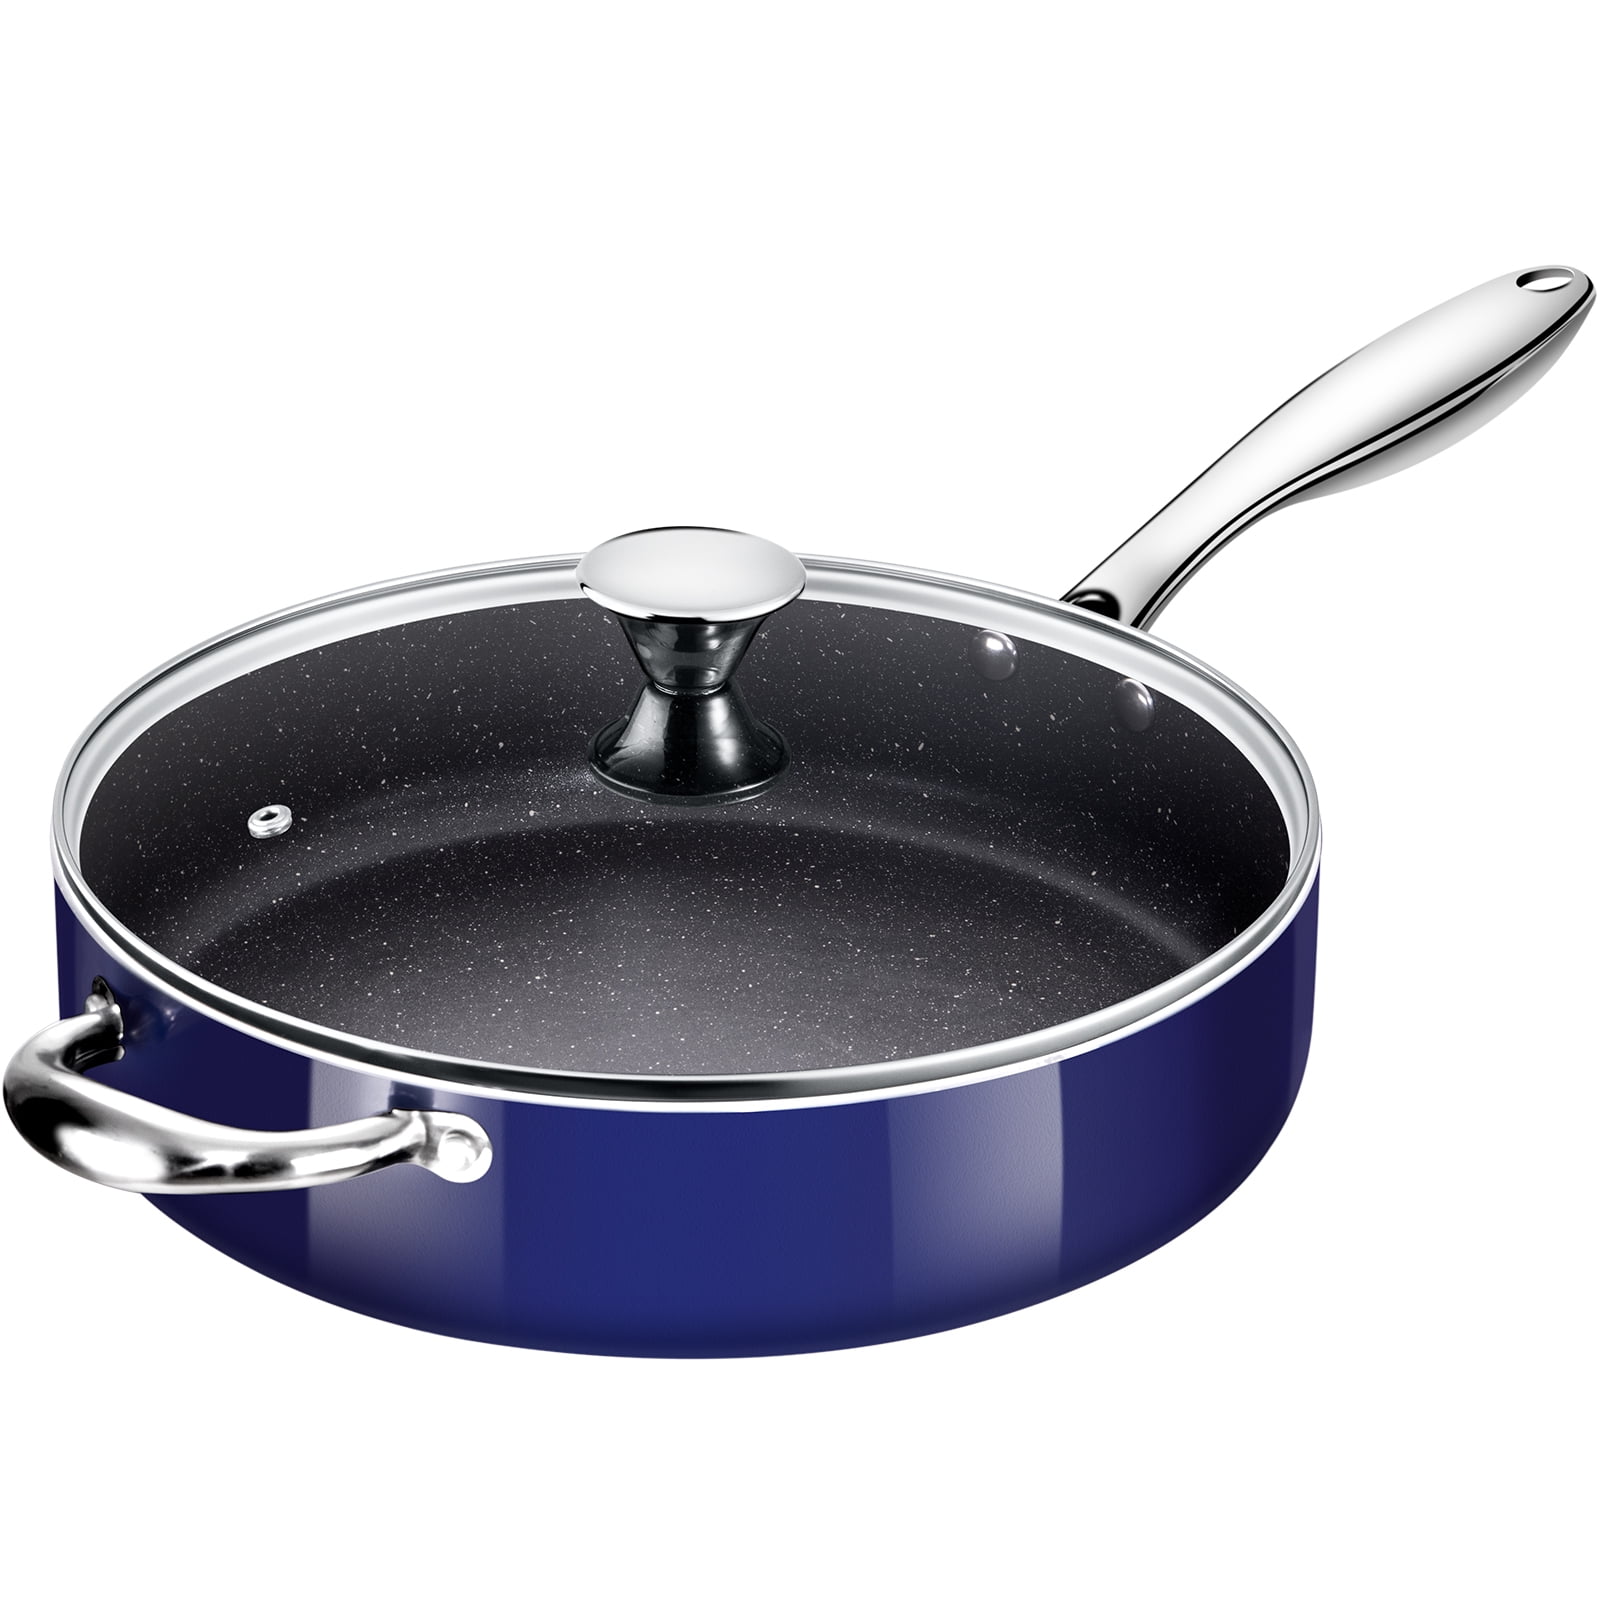 Fry Pan Non Stick Surface Smokeless Kitchen Cookware Small Saute Pan Induction Omelette Pan for Induction Cooker GAS RV Travel, Size: 12.5 cm, Blue